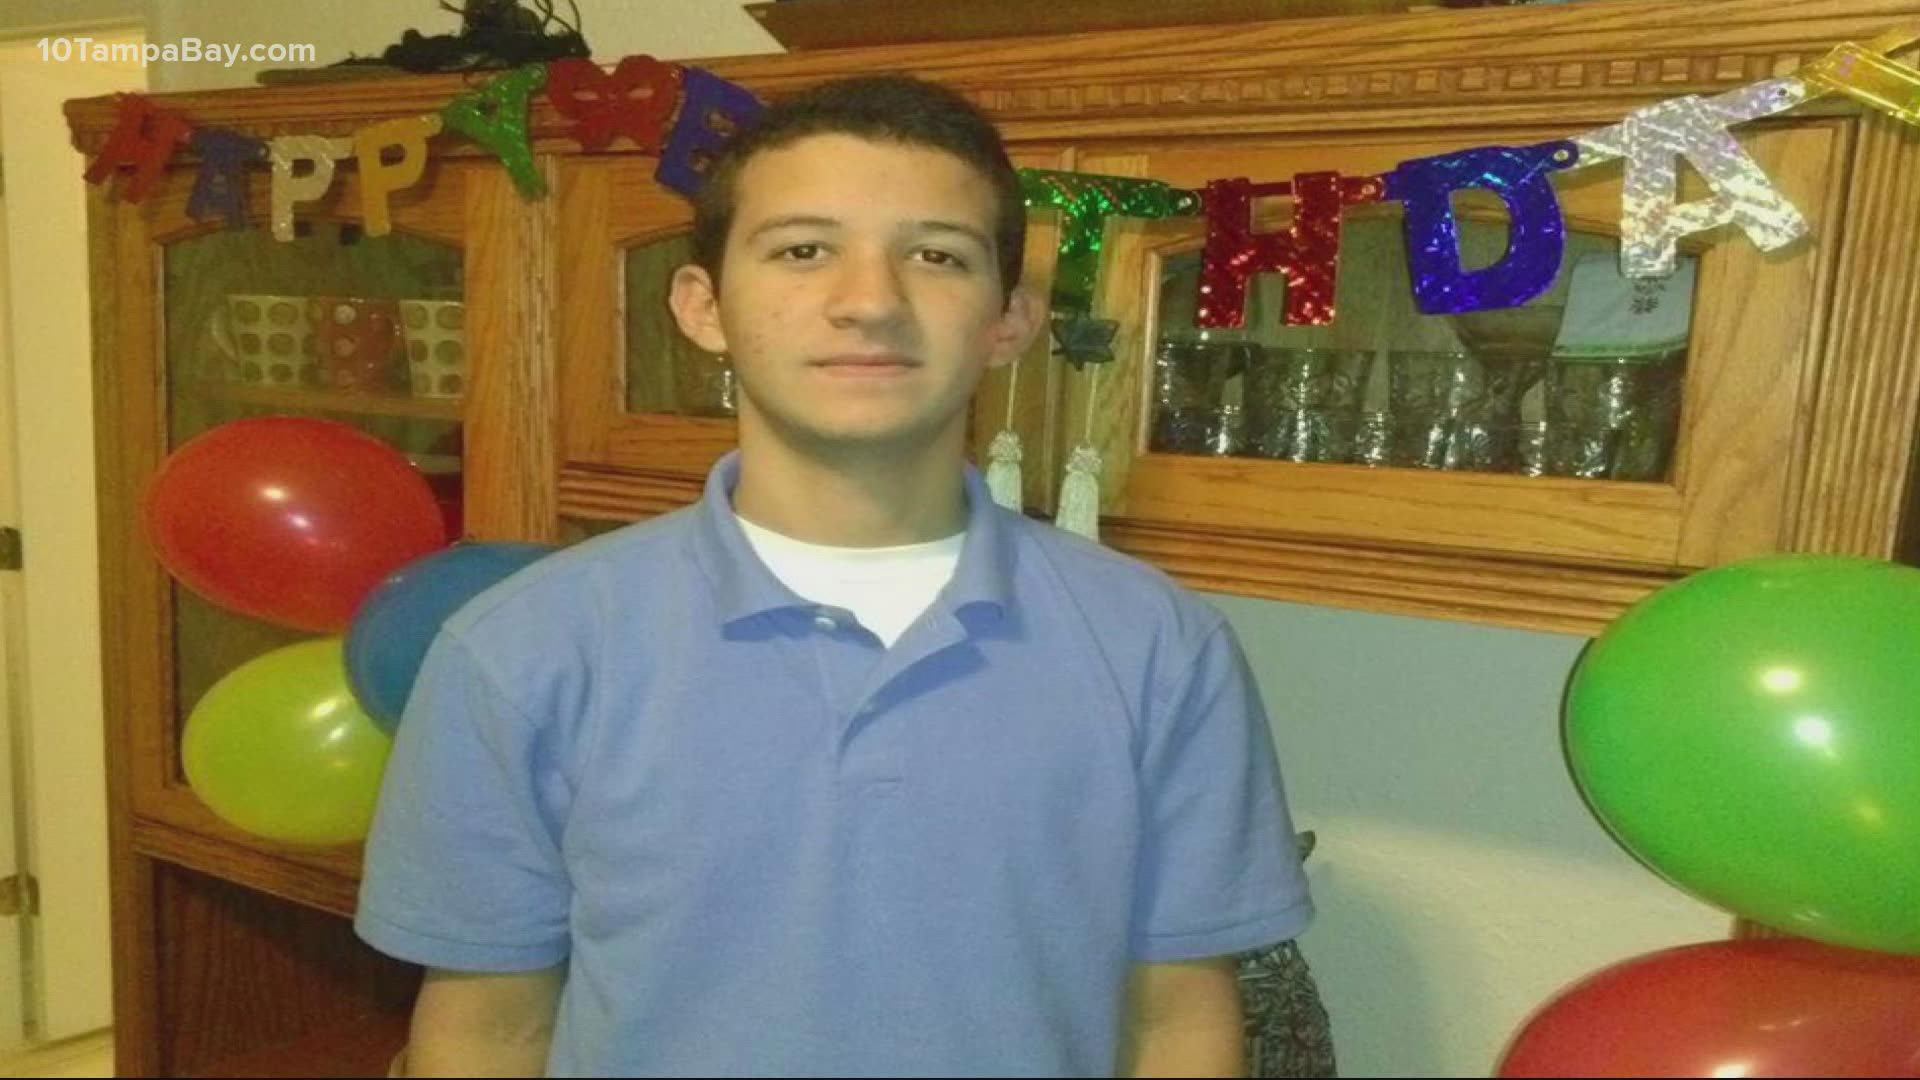 Tejada's mother said he left a suicide note before his disappearance.